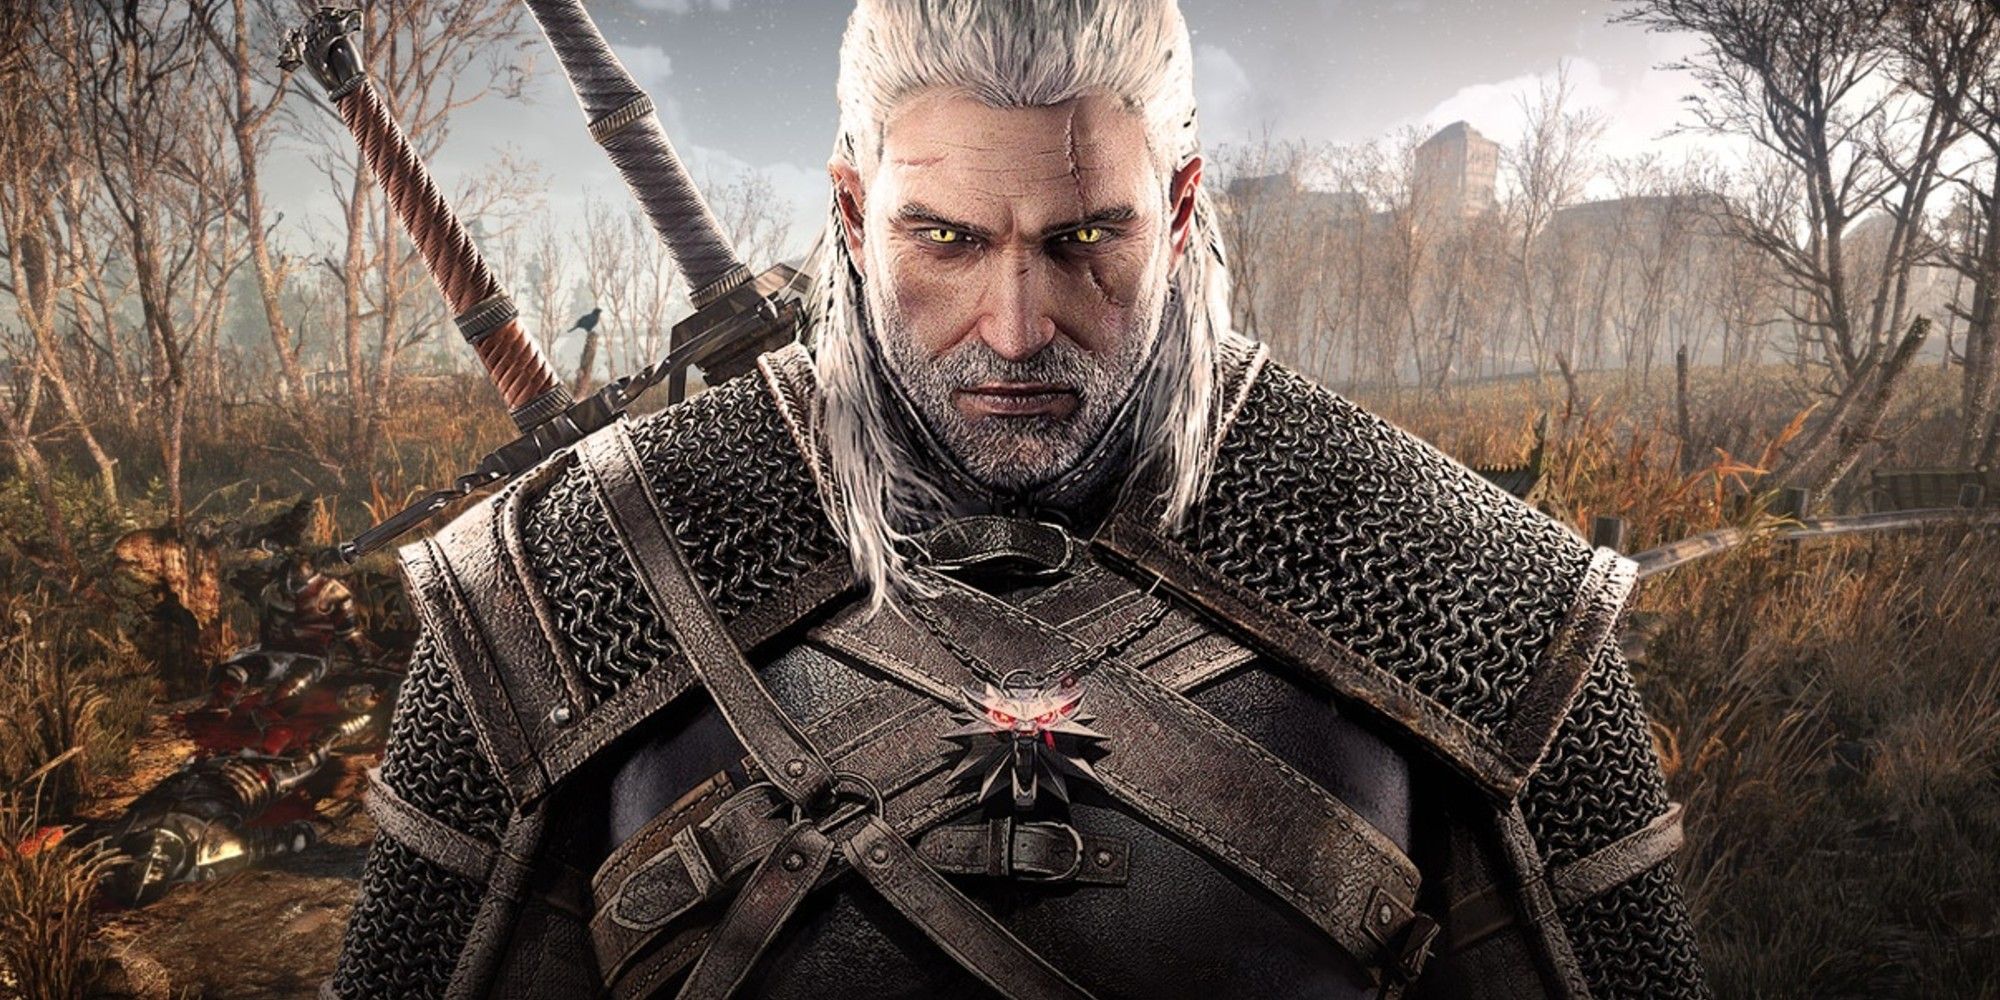 Poster from The Witcher 3.